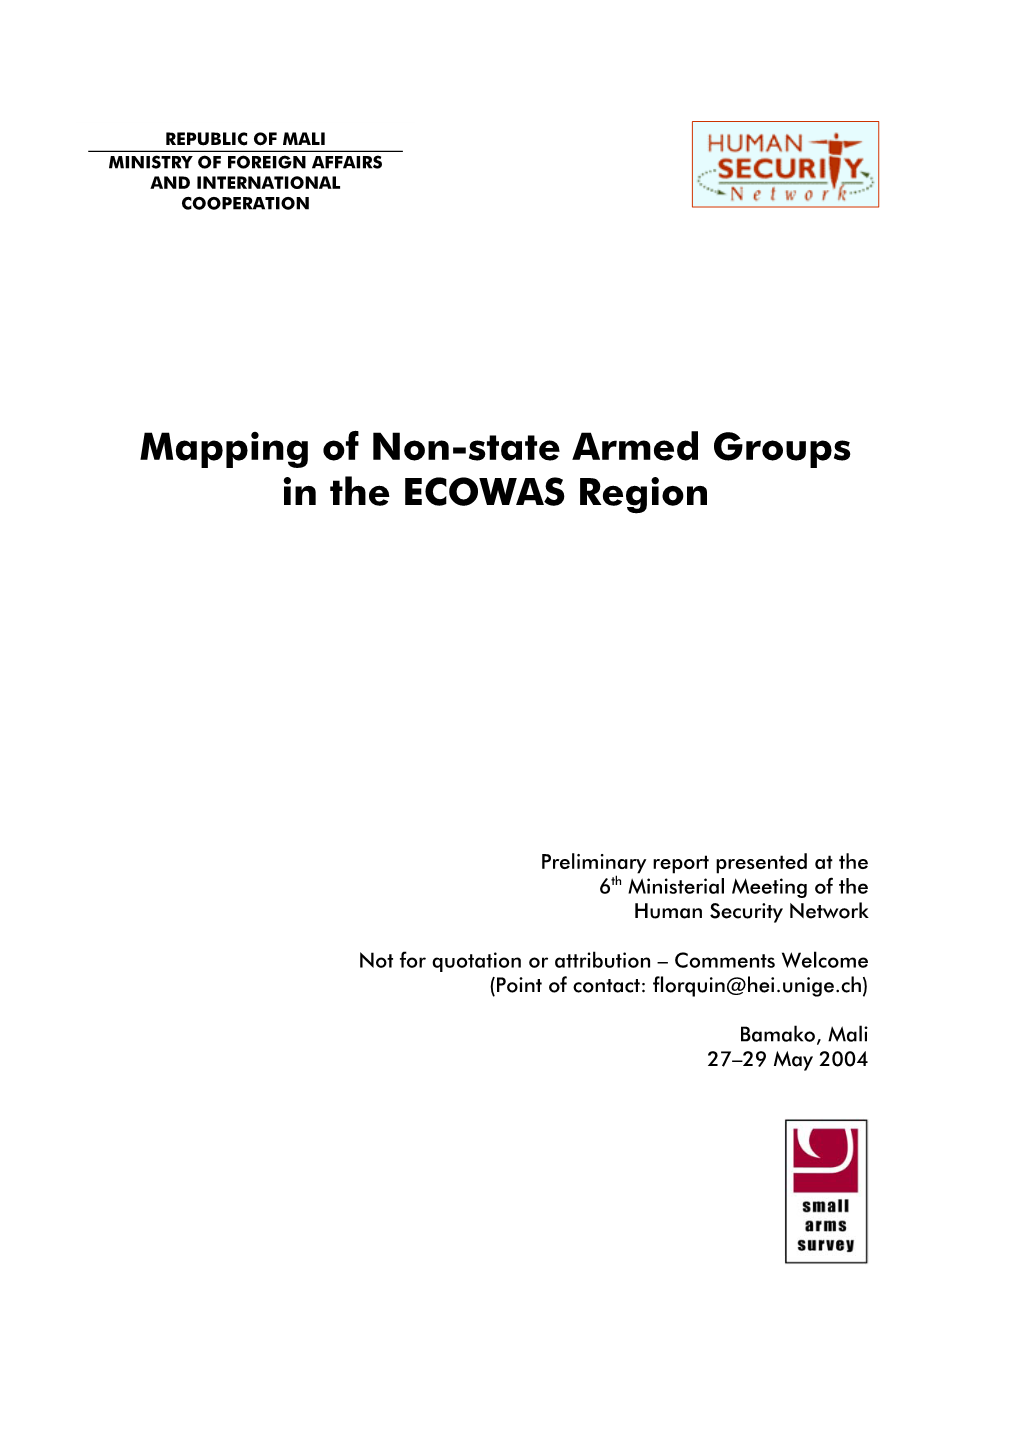 2004-05-27 Mapping of Non-State Armed Groups in the ECOWAS